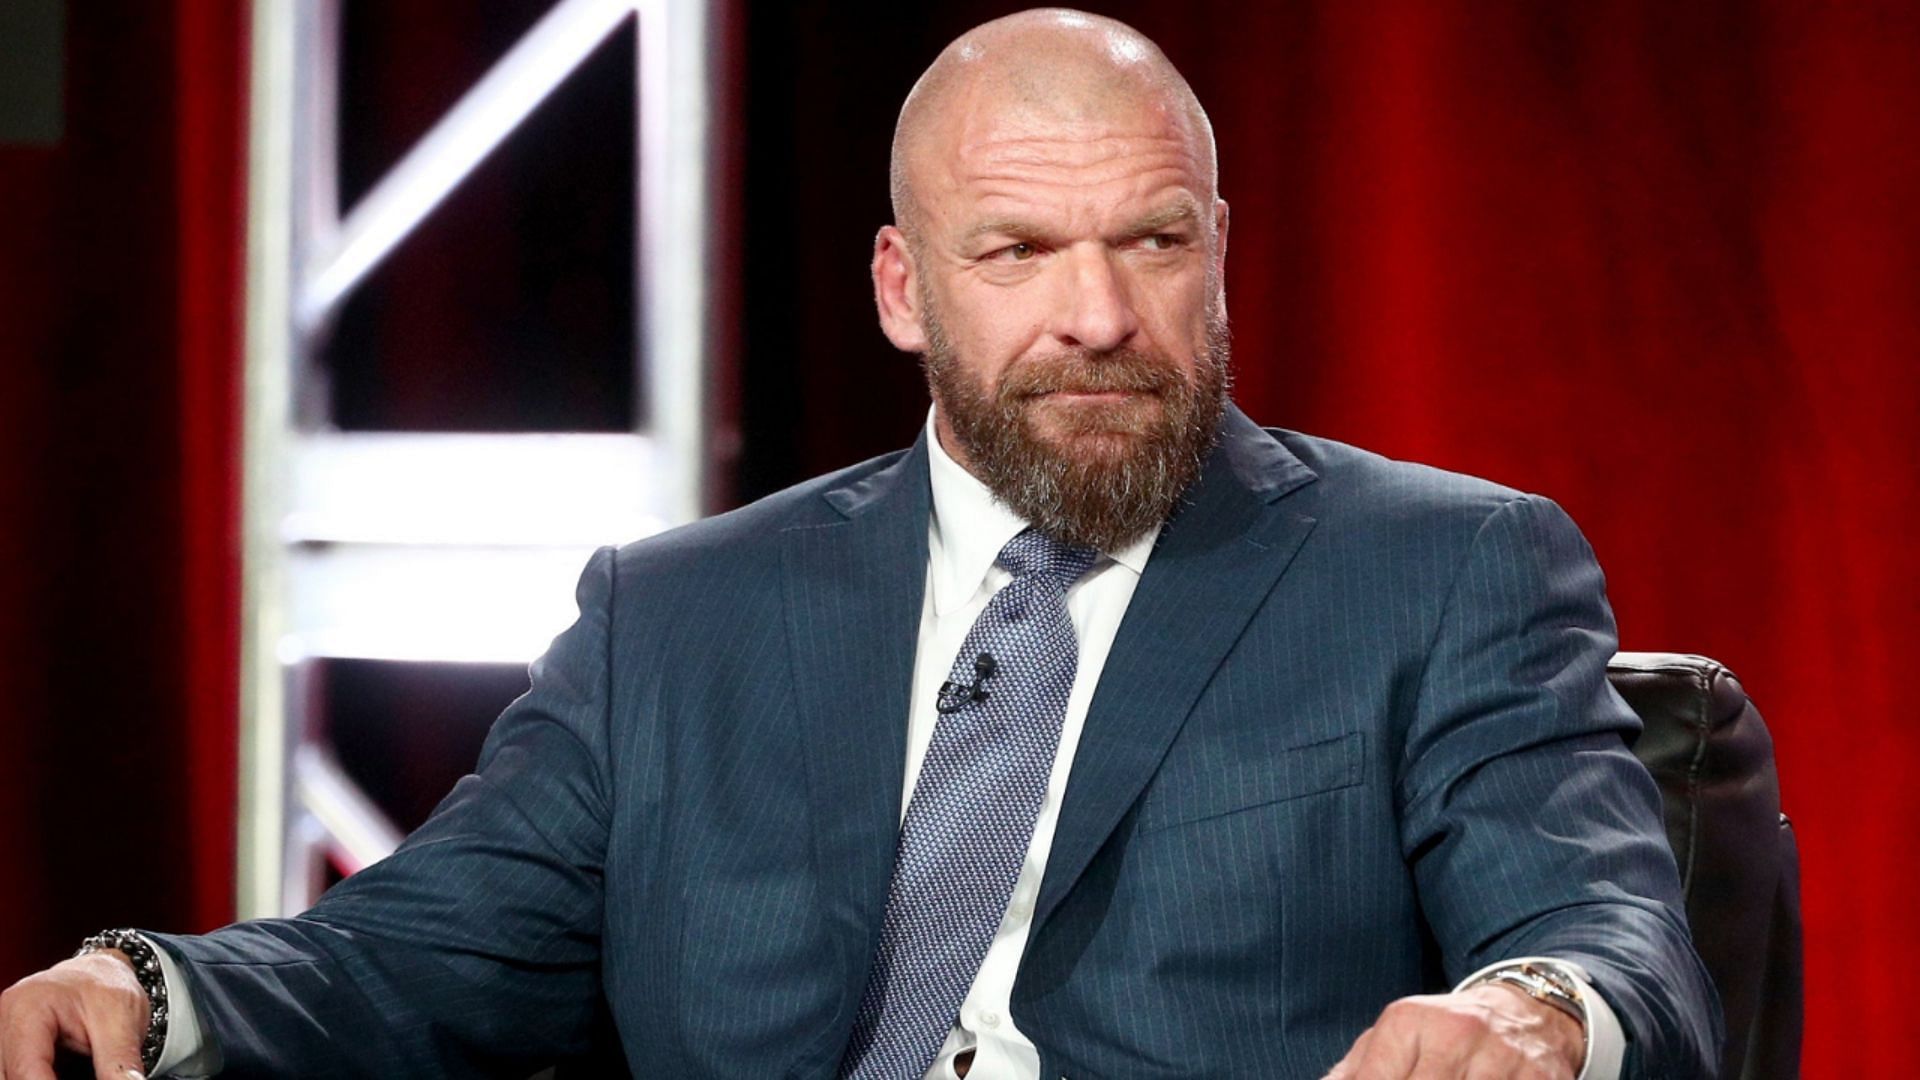 Triple H pitched WWE to buy the indy promotion.